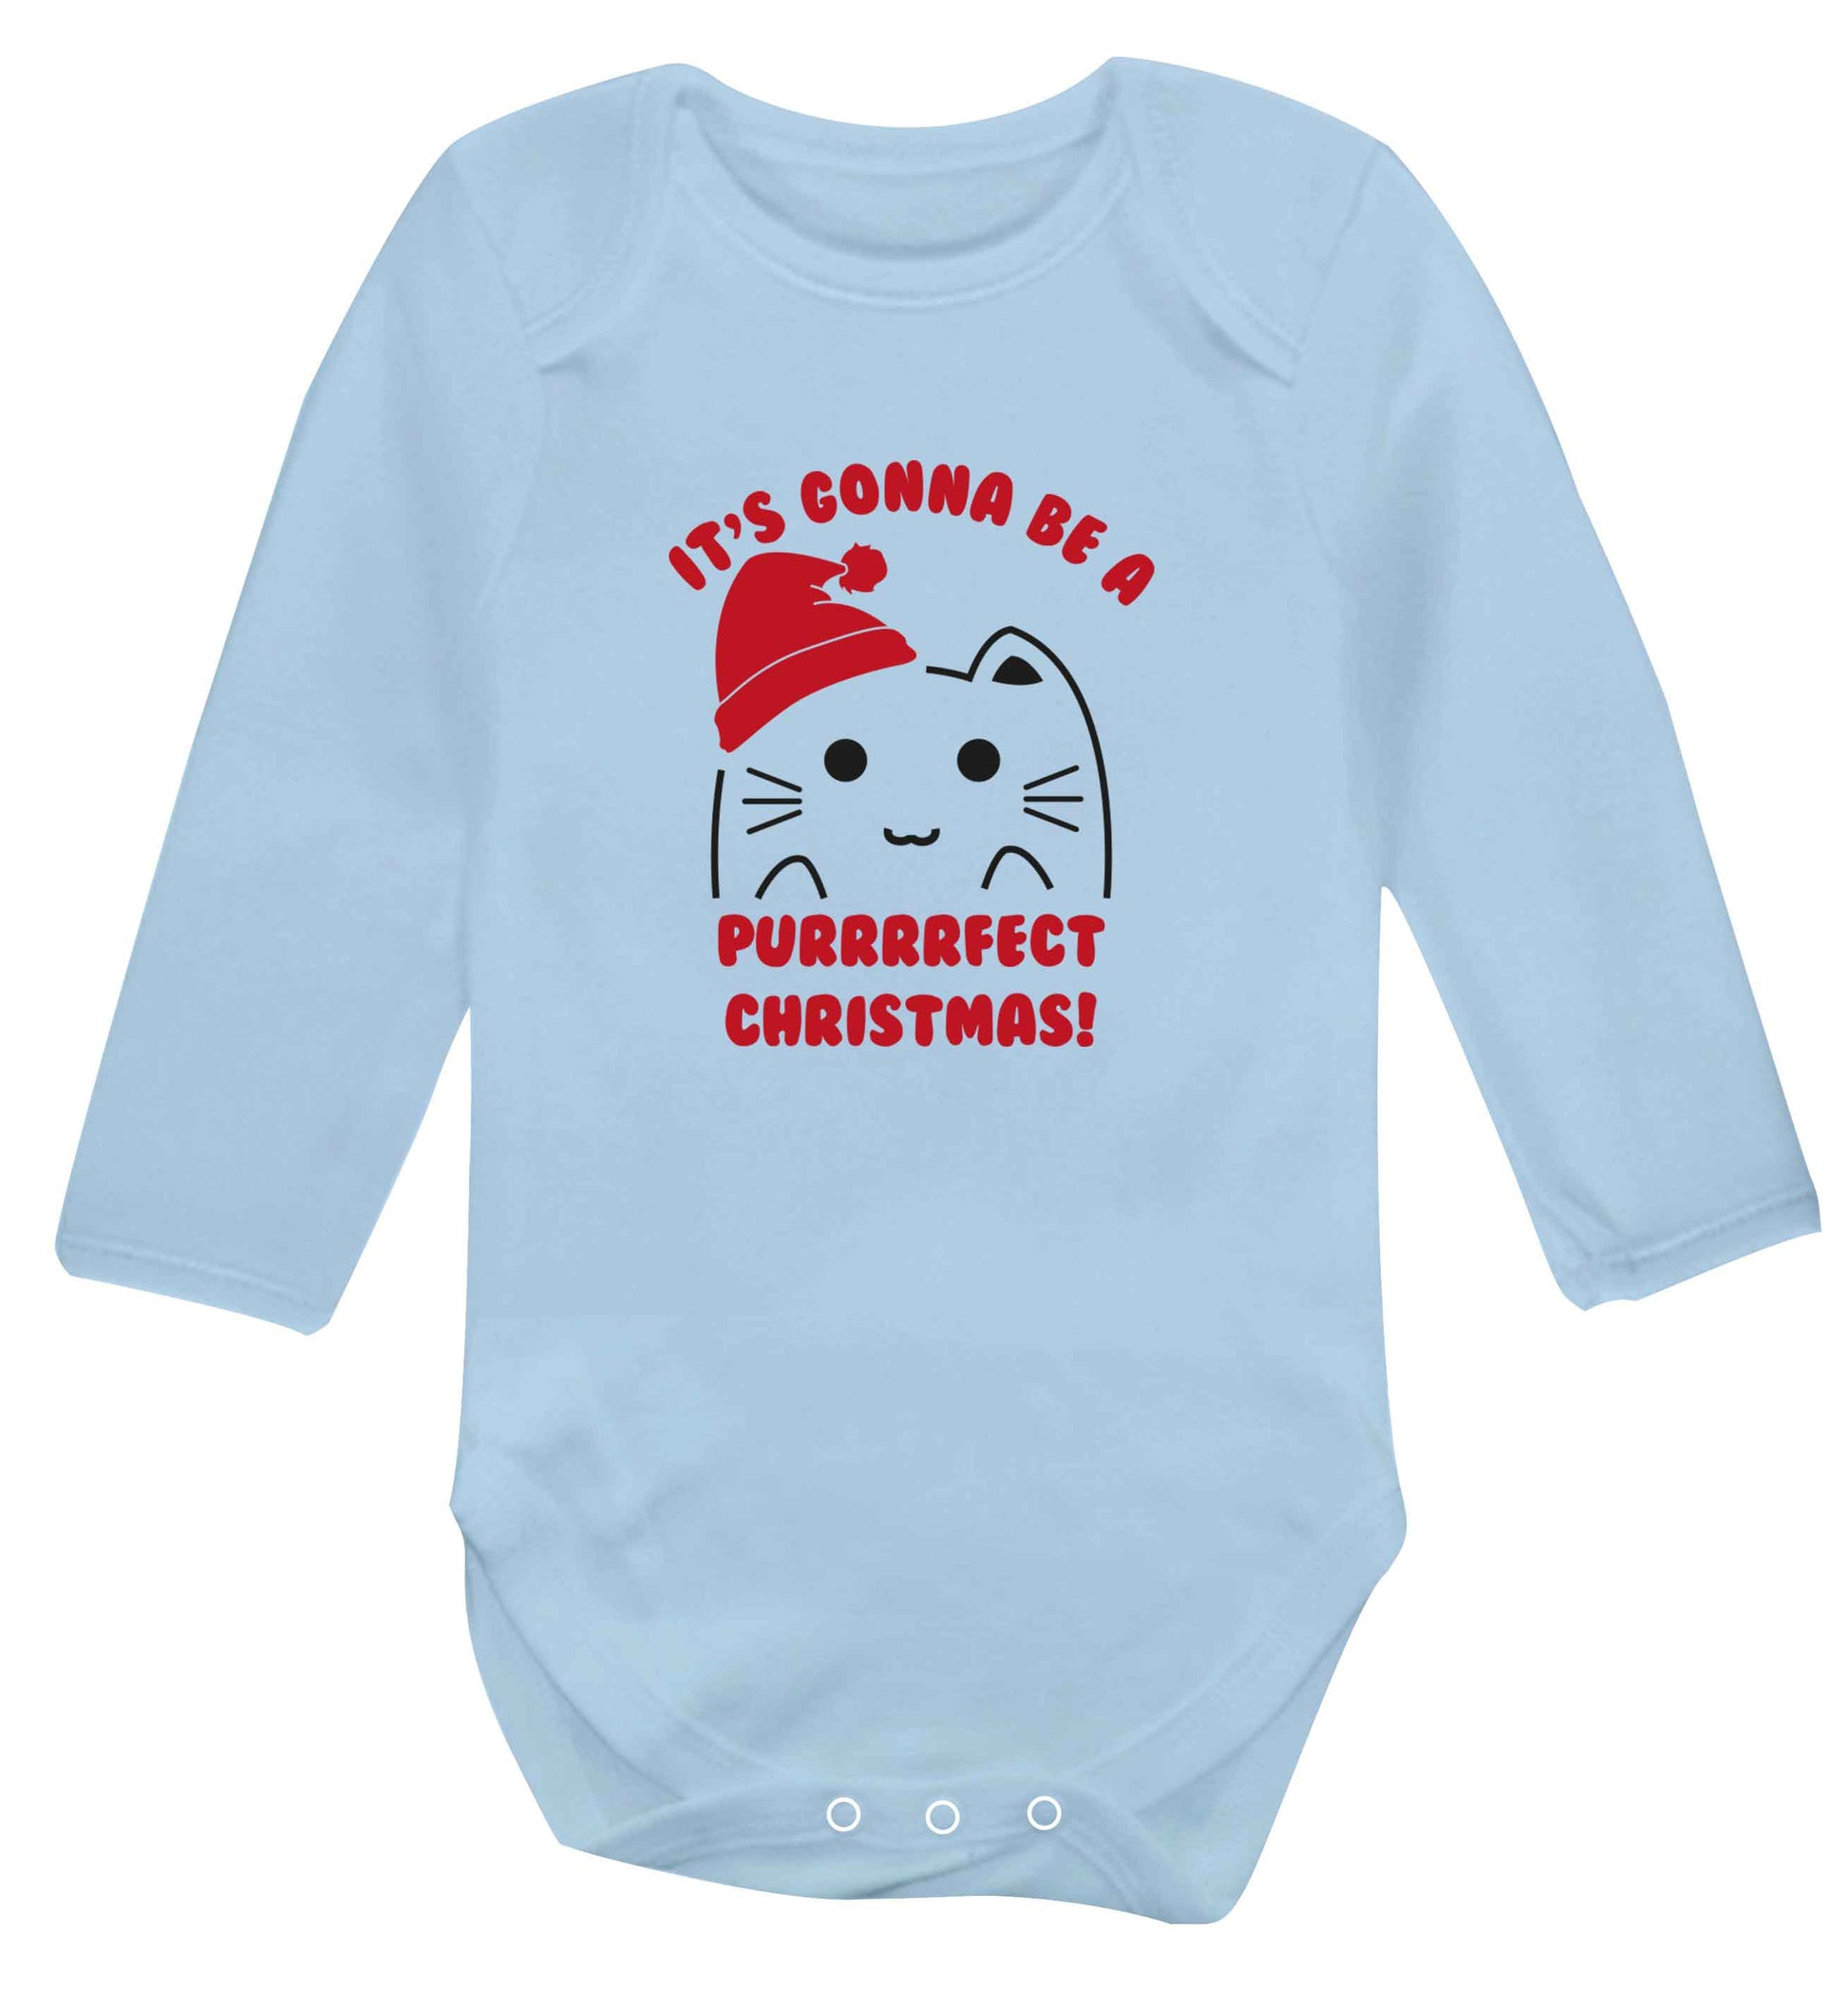 It's going to be a purrfect Christmas baby vest long sleeved pale blue 6-12 months